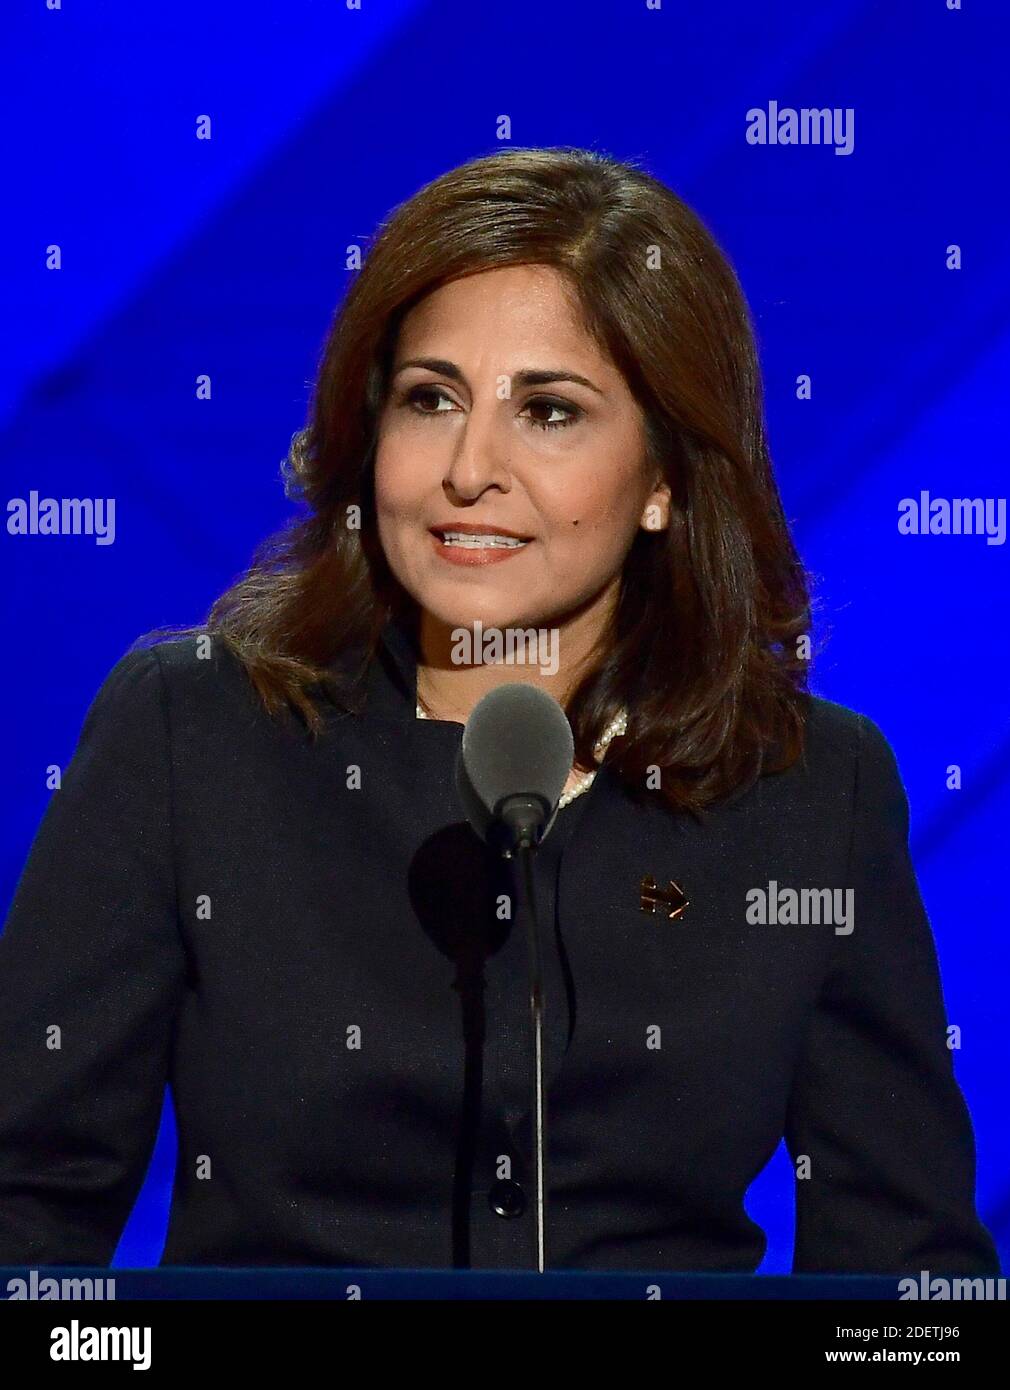 Neera Tanden, President and CEO, Center for American Progress, makes remarks during the third session of the 2016 Democratic National Convention at the Wells Fargo Center in Philadelphia, Pennsylvania on Wednesday, July 27, 2016.Credit: Ron Sachs/CNP (RESTRICTION: NO New York or New Jersey Newspapers or newspapers within a 75 mile radius of New York City) | usage worldwide Stock Photo